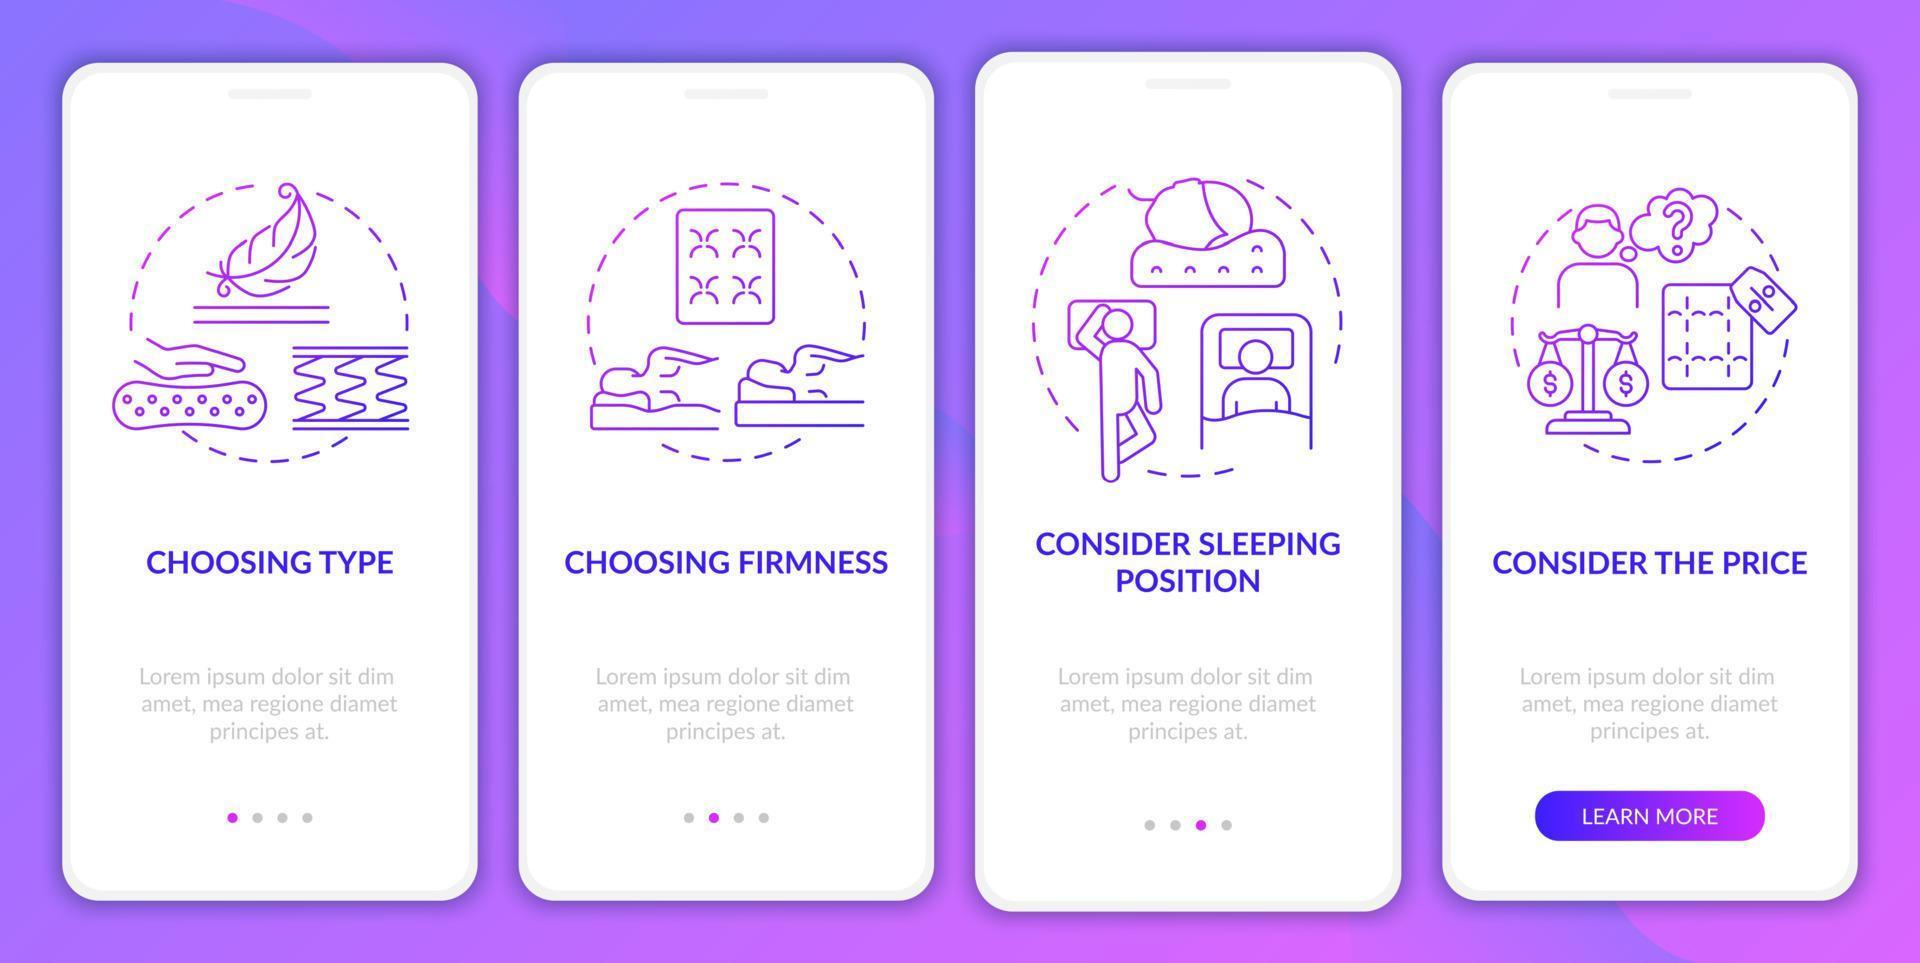 Choosing mattress purple gradient onboarding mobile app page screen. Walkthrough 4 steps graphic instructions with concepts. UI, UX, GUI vector template with linear color illustrations